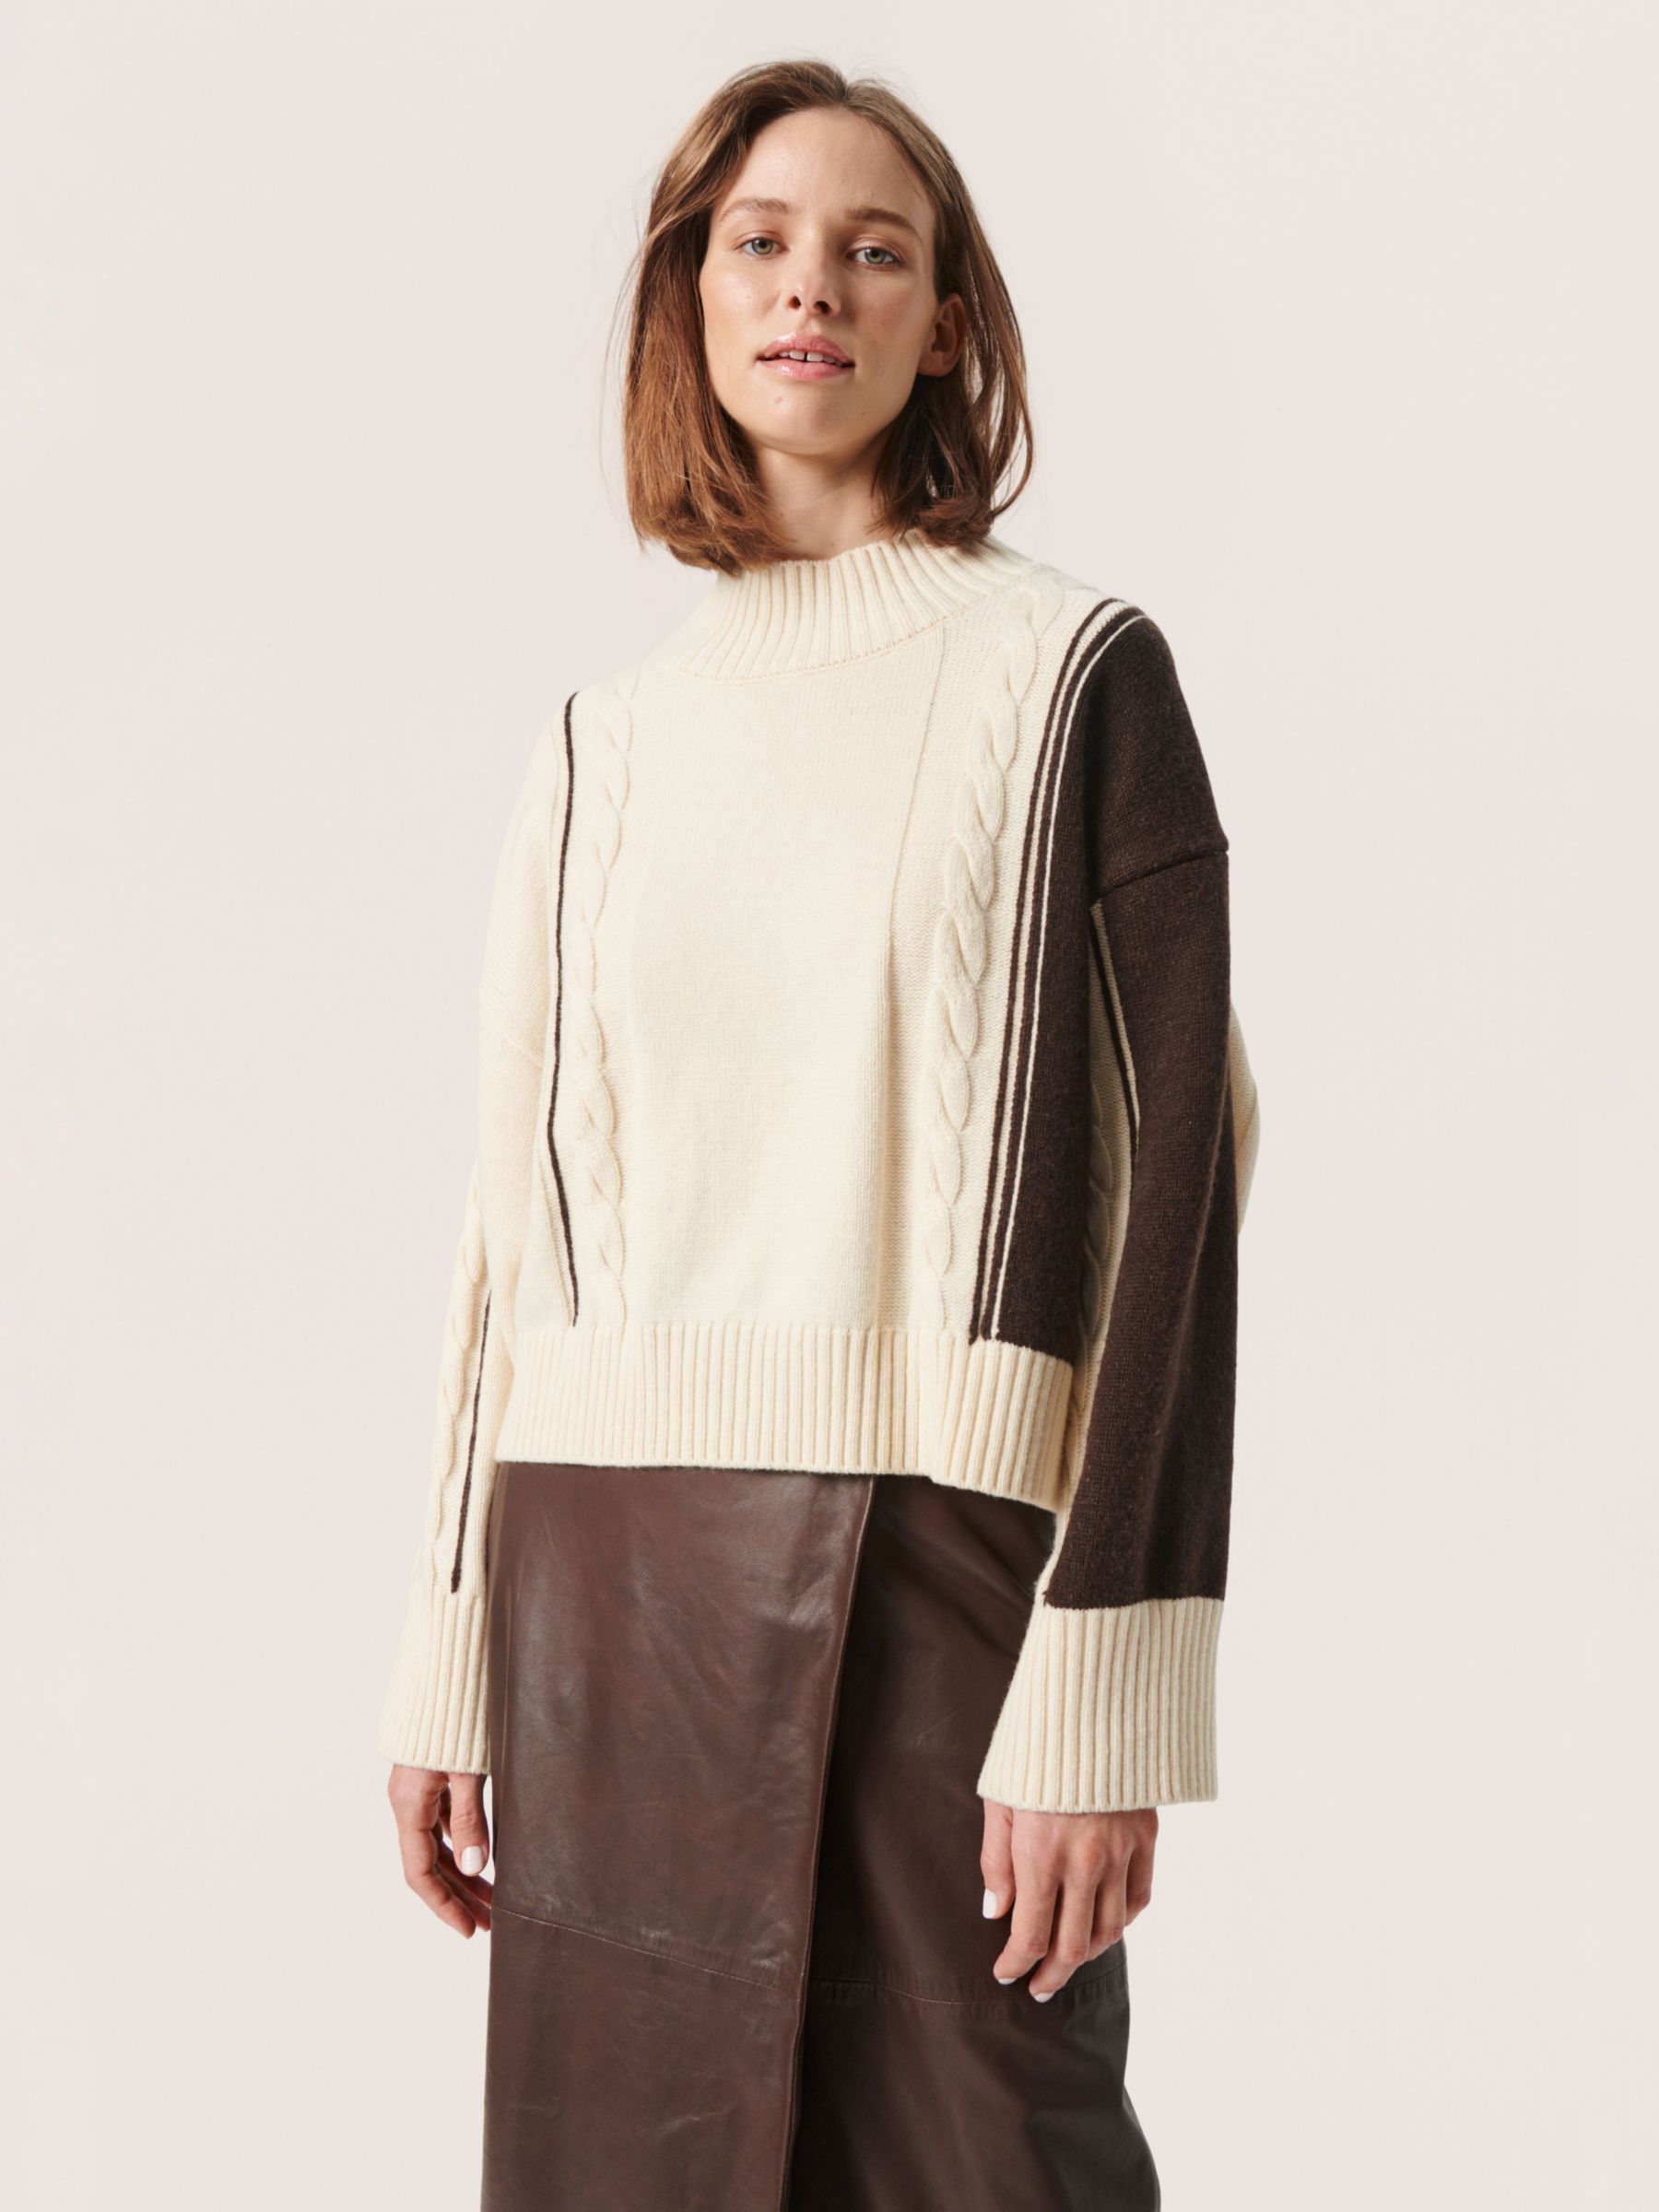 Buy Soaked In Luxury Llena Textured Jumper, White/Multi Online at johnlewis.com